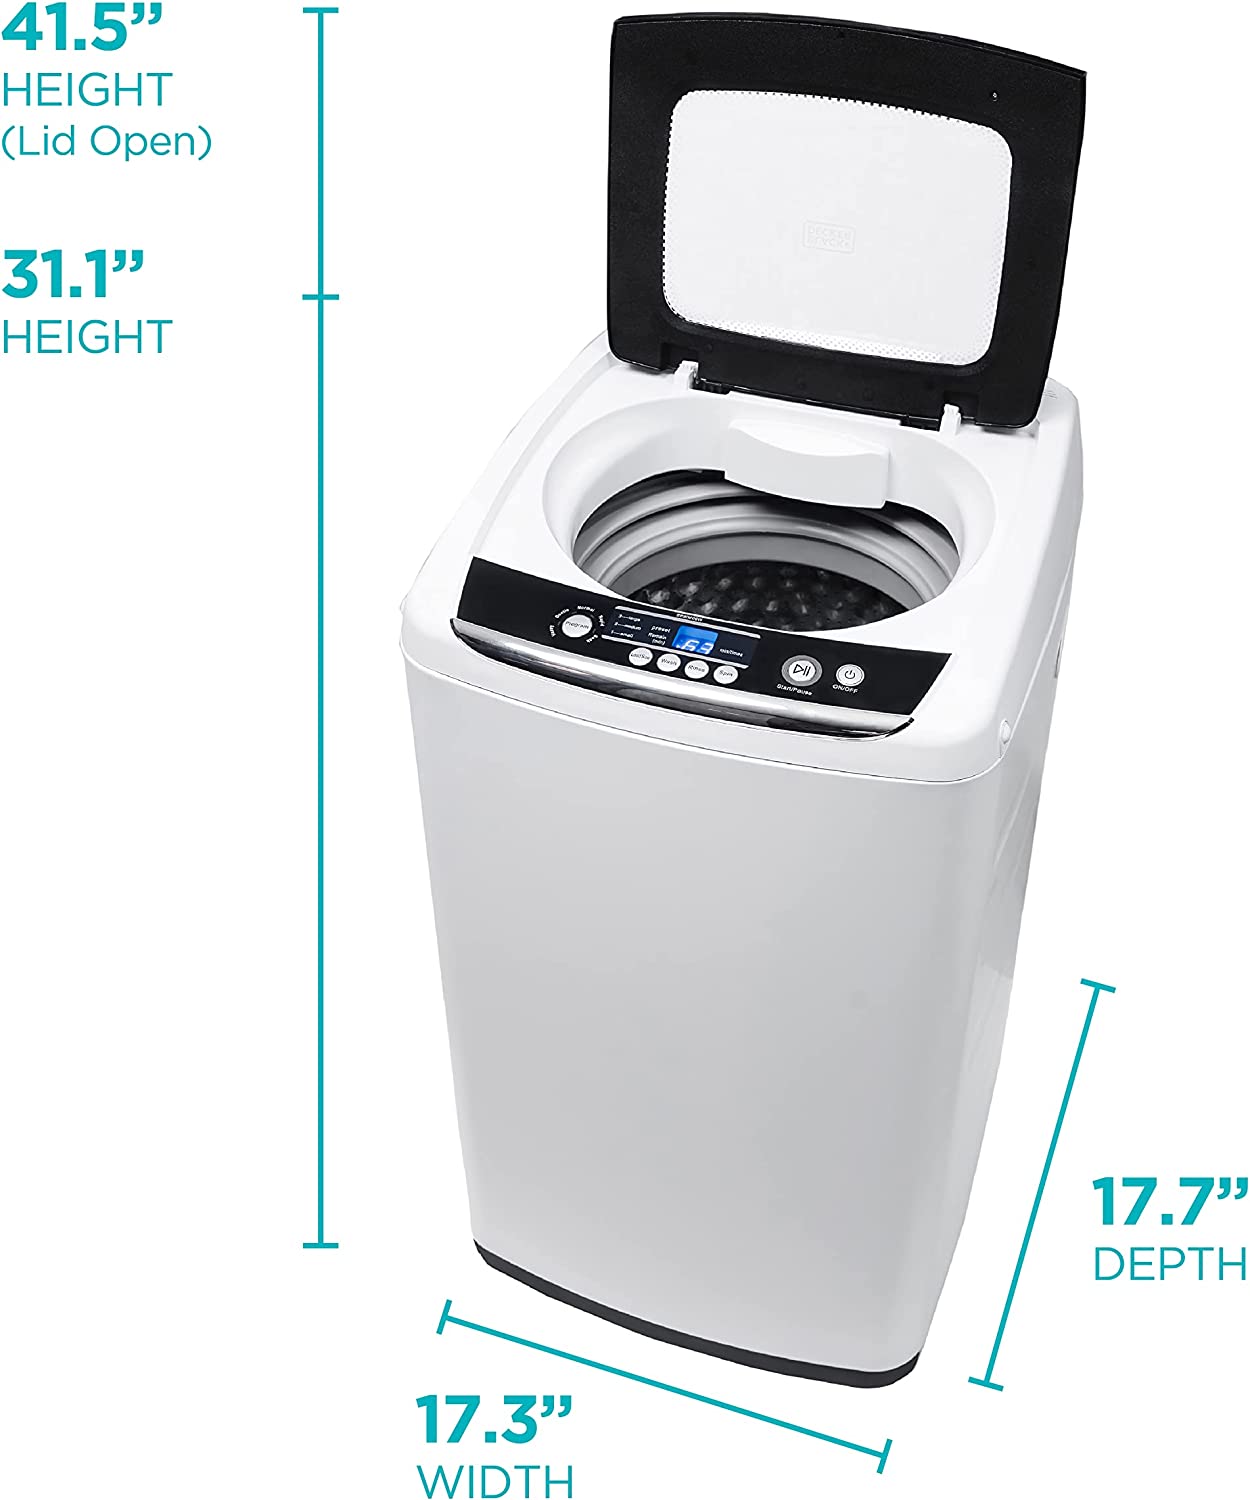 BLACK+DECKER Small Portable Washer, Washing Machine for Household Use, Portable  Washer 0.9 Cu. Ft. with 5 Cycles, Transparent Lid & LED Display